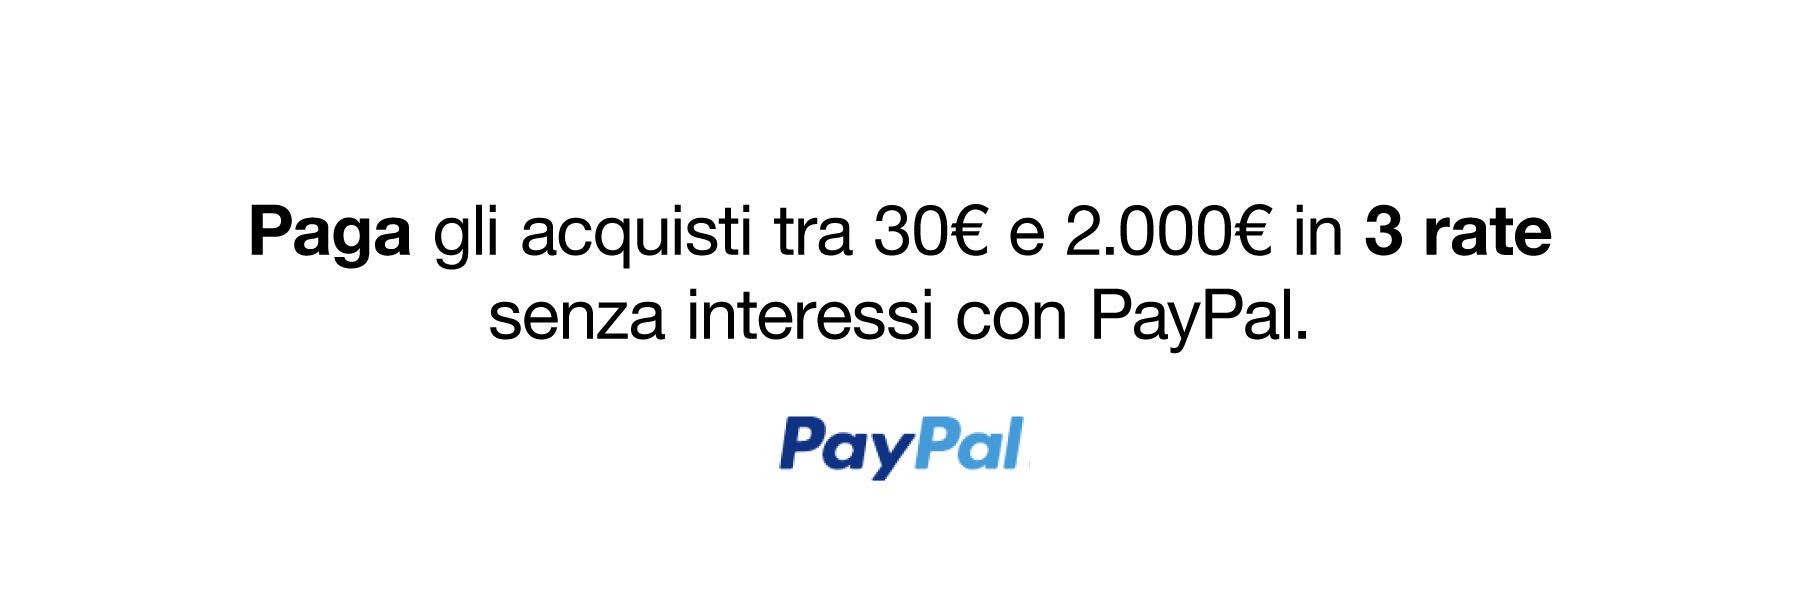 PAYPAL 3 RATE